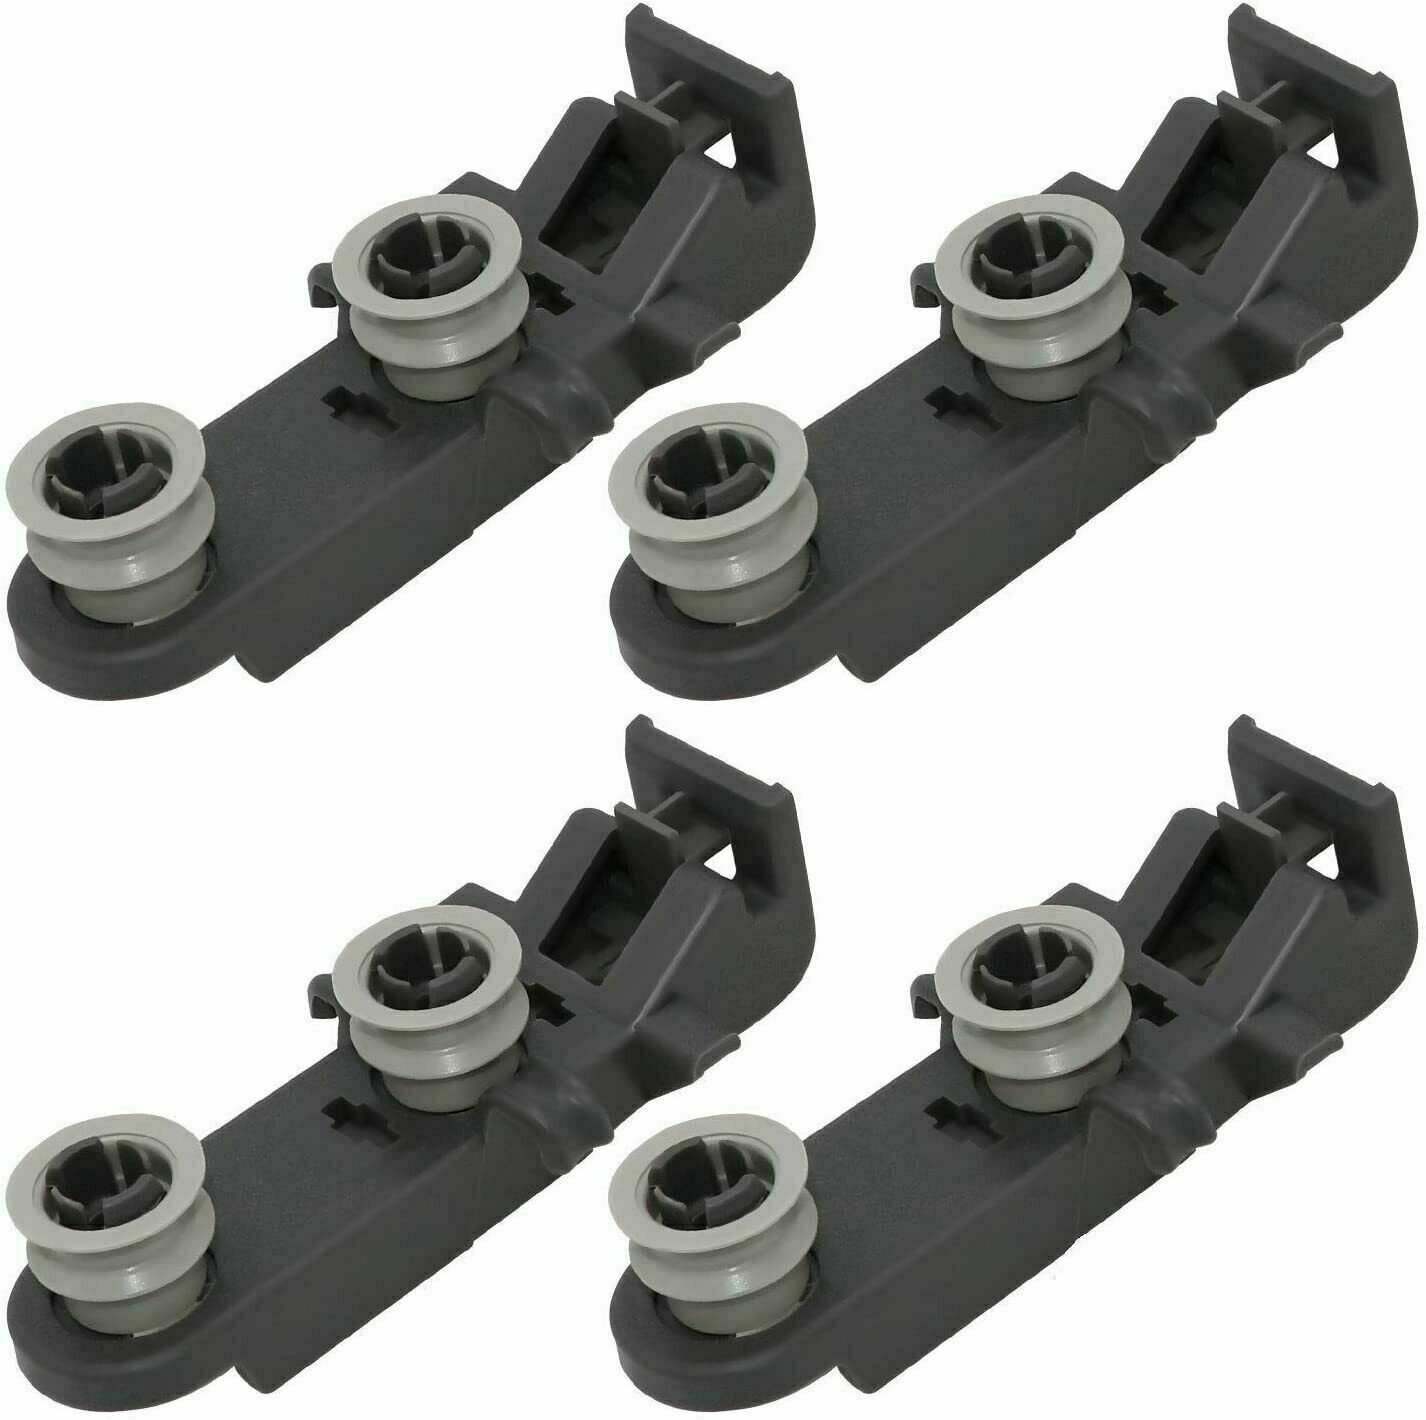 4Pcs Dishwasher Rack Roller Wheel-Whirlpool WDT710PAYB5 WDT710PAYH5 WDT710PAYW5 - $73.18